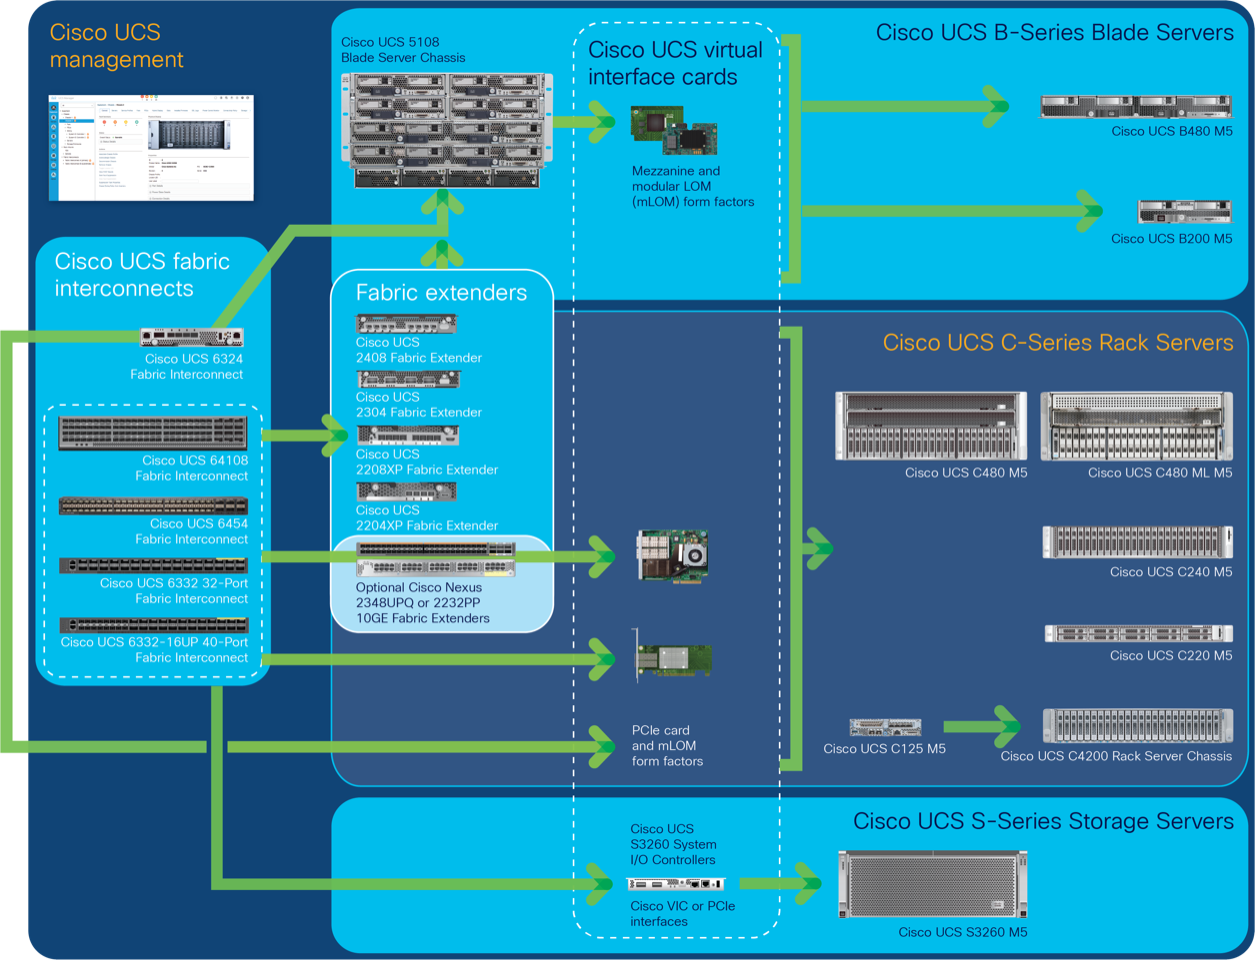 The Cisco Unified Computing System is a Highly Available Cohesive Architecture